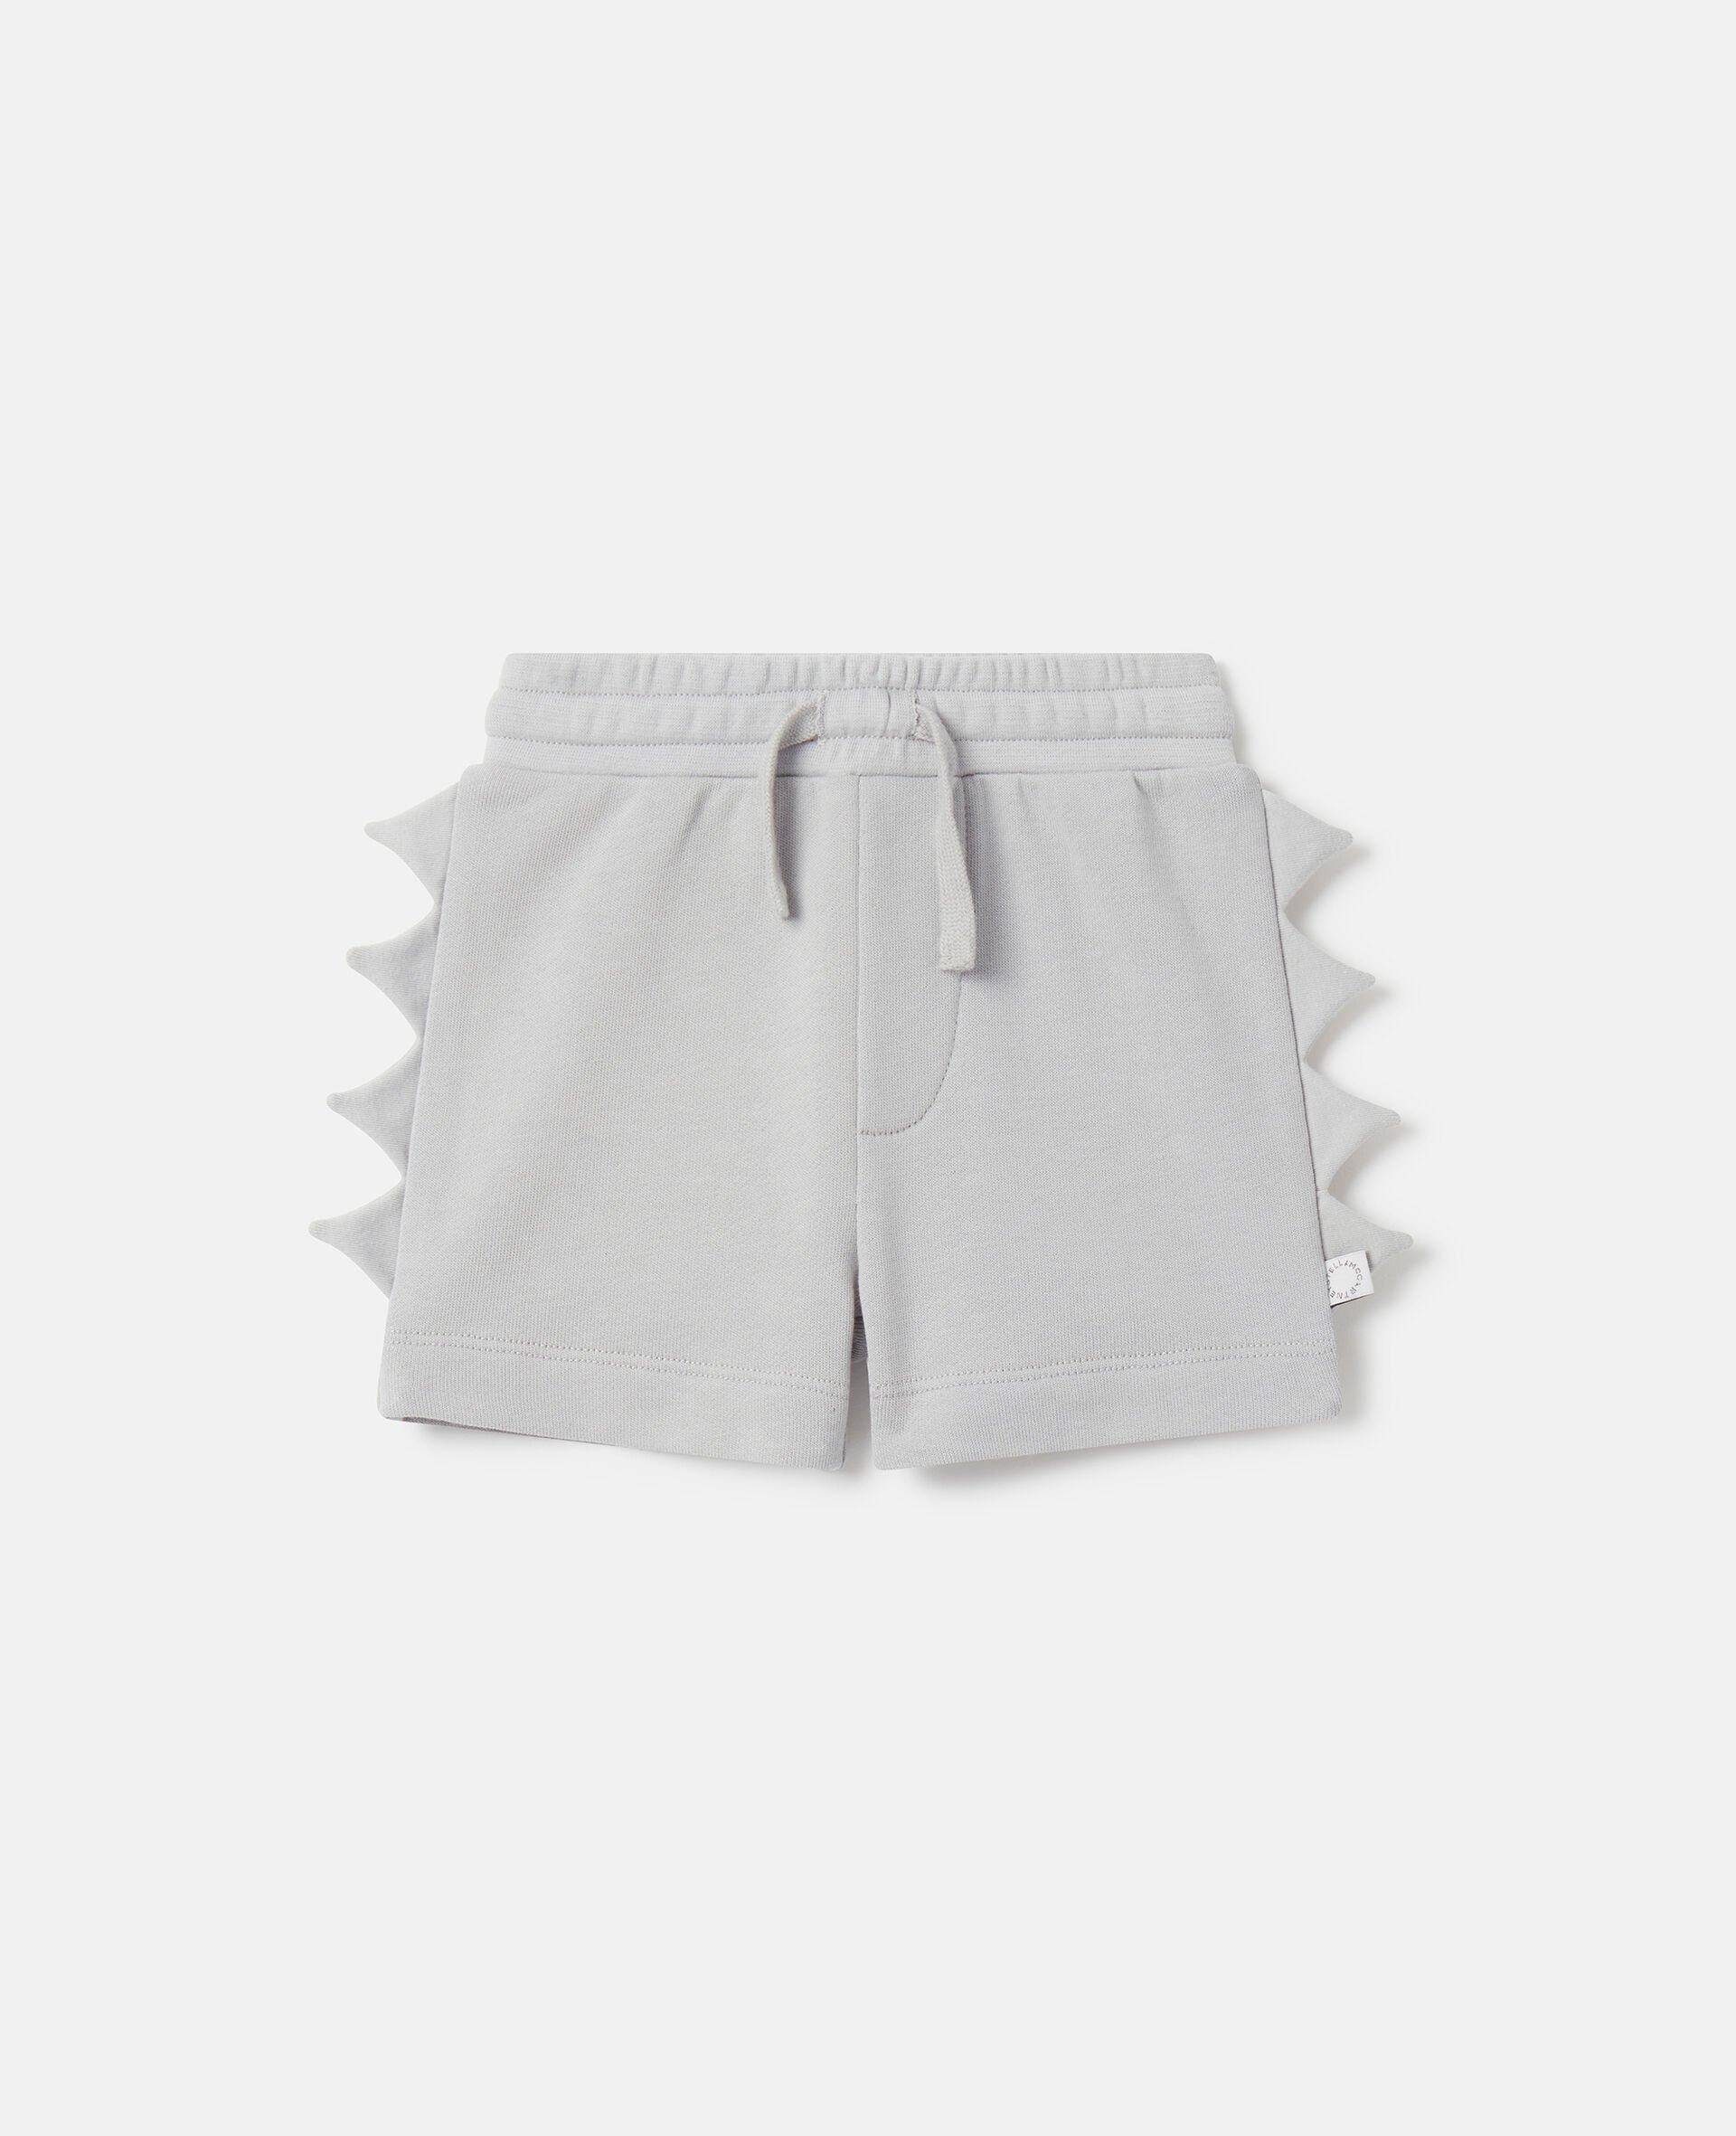 Shark Fin Spike Shorts-グレー-large image number 0